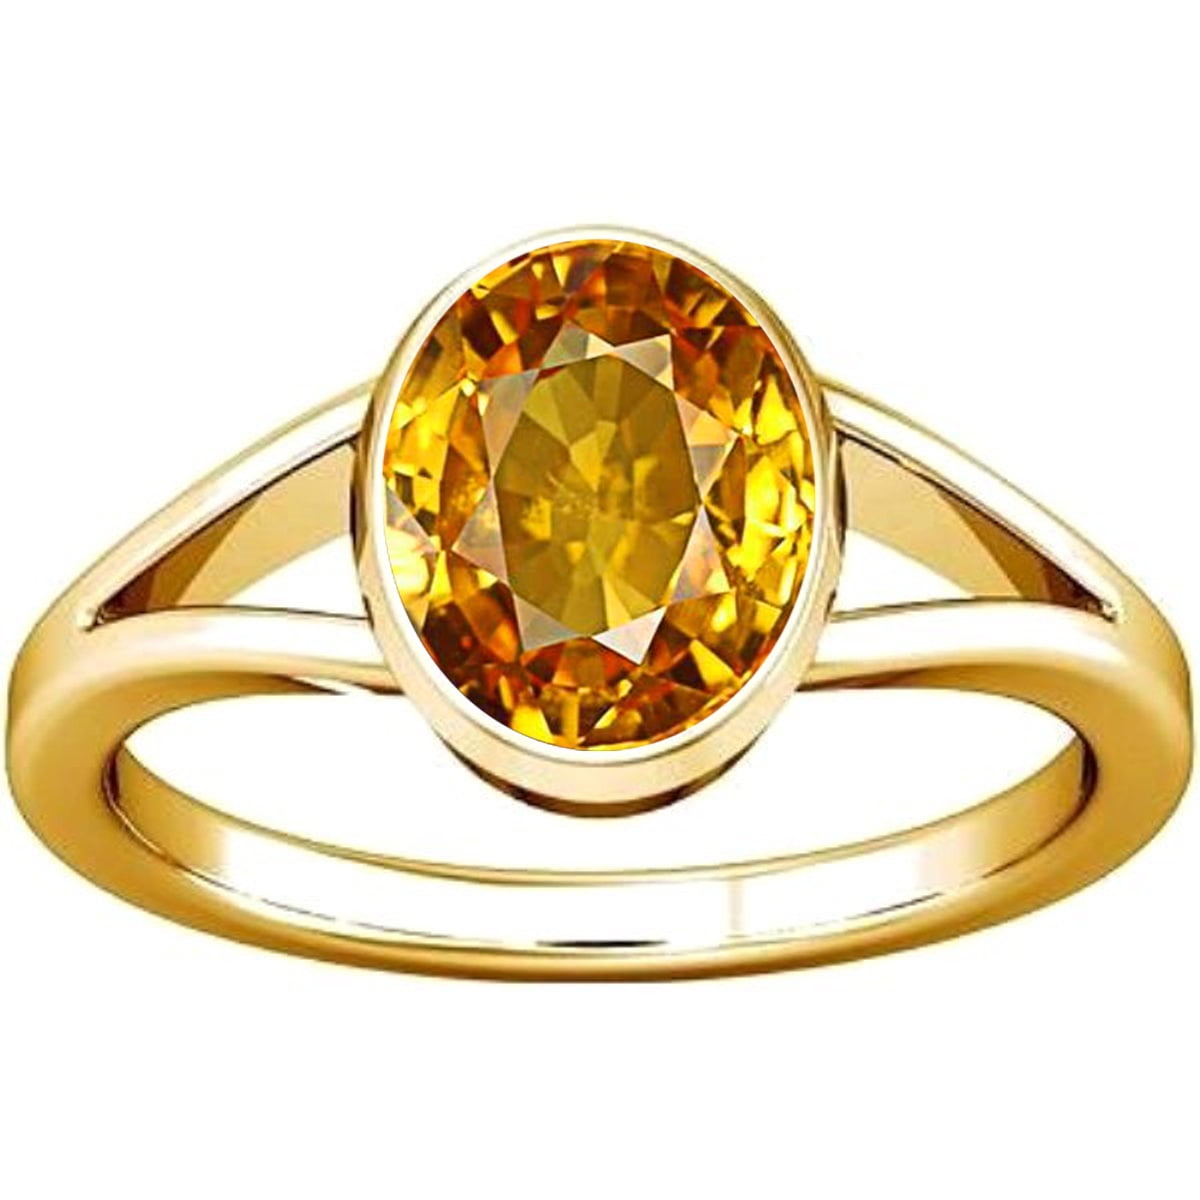 Sterling Silver Golden Topaz Ring | Crystal Rings by Made In Earth US